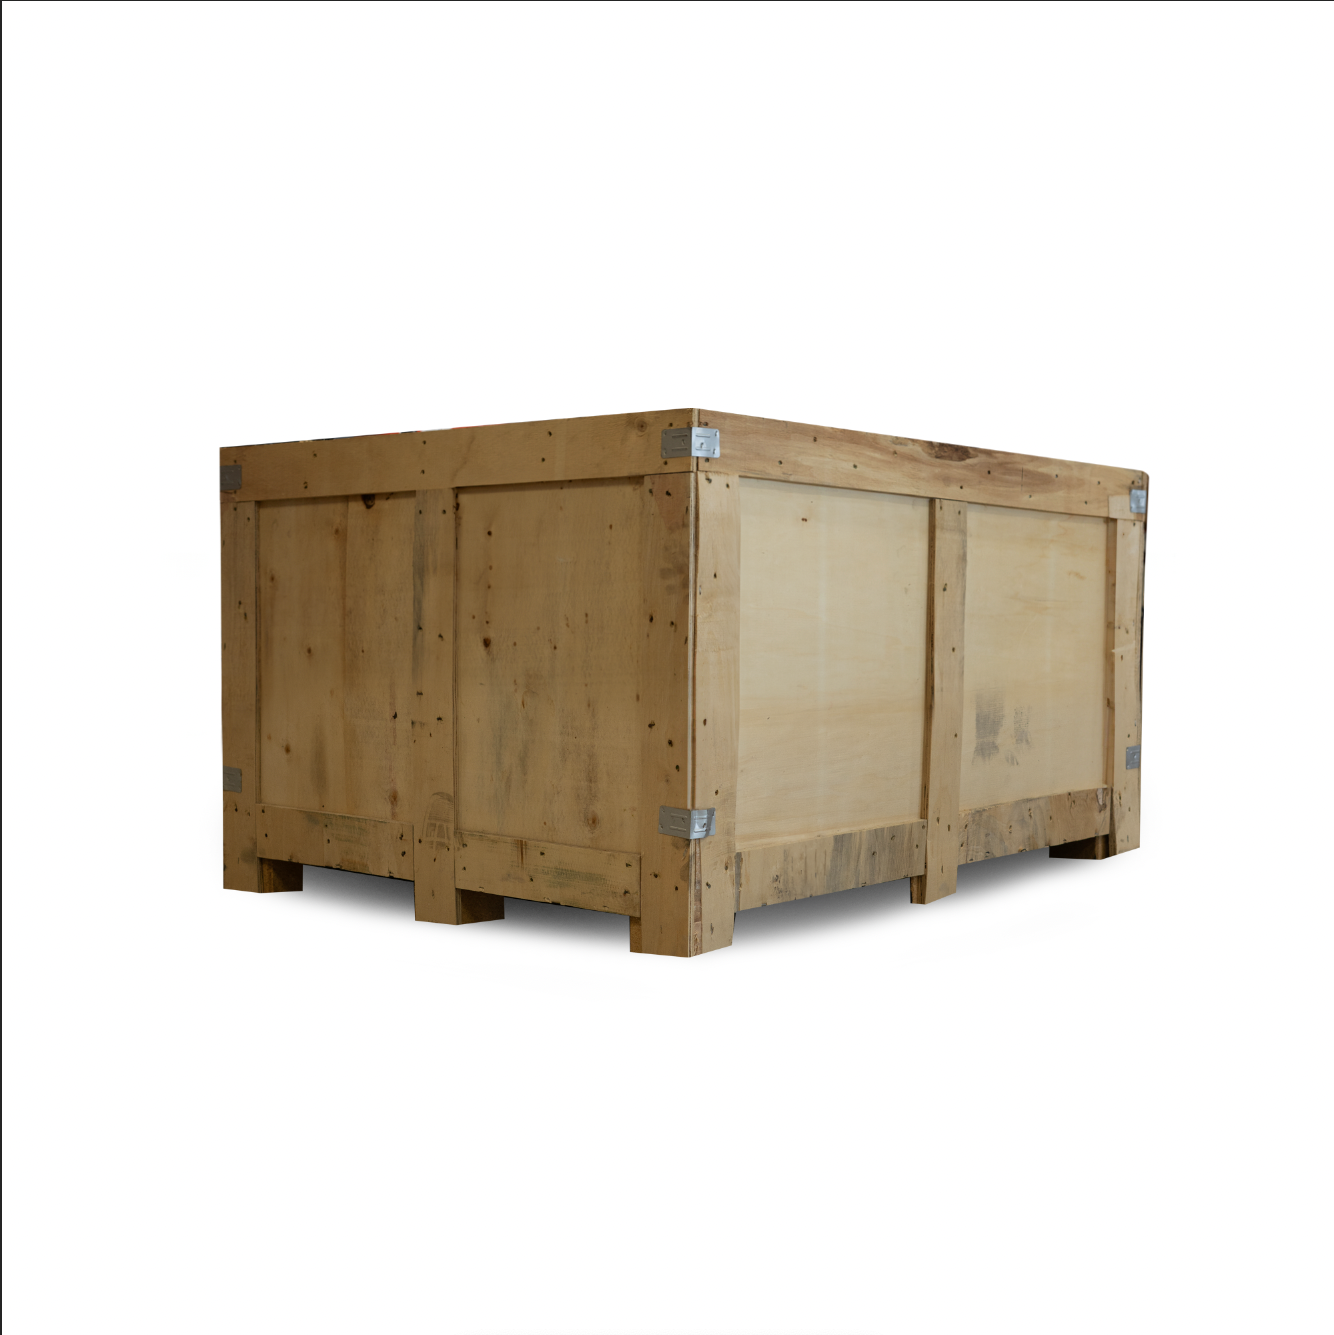 3.5k Trailer Axle Brake Assembly Crate- 3500lb 10x2.25" - Right Hand or Left Hand- Dexter Compatible